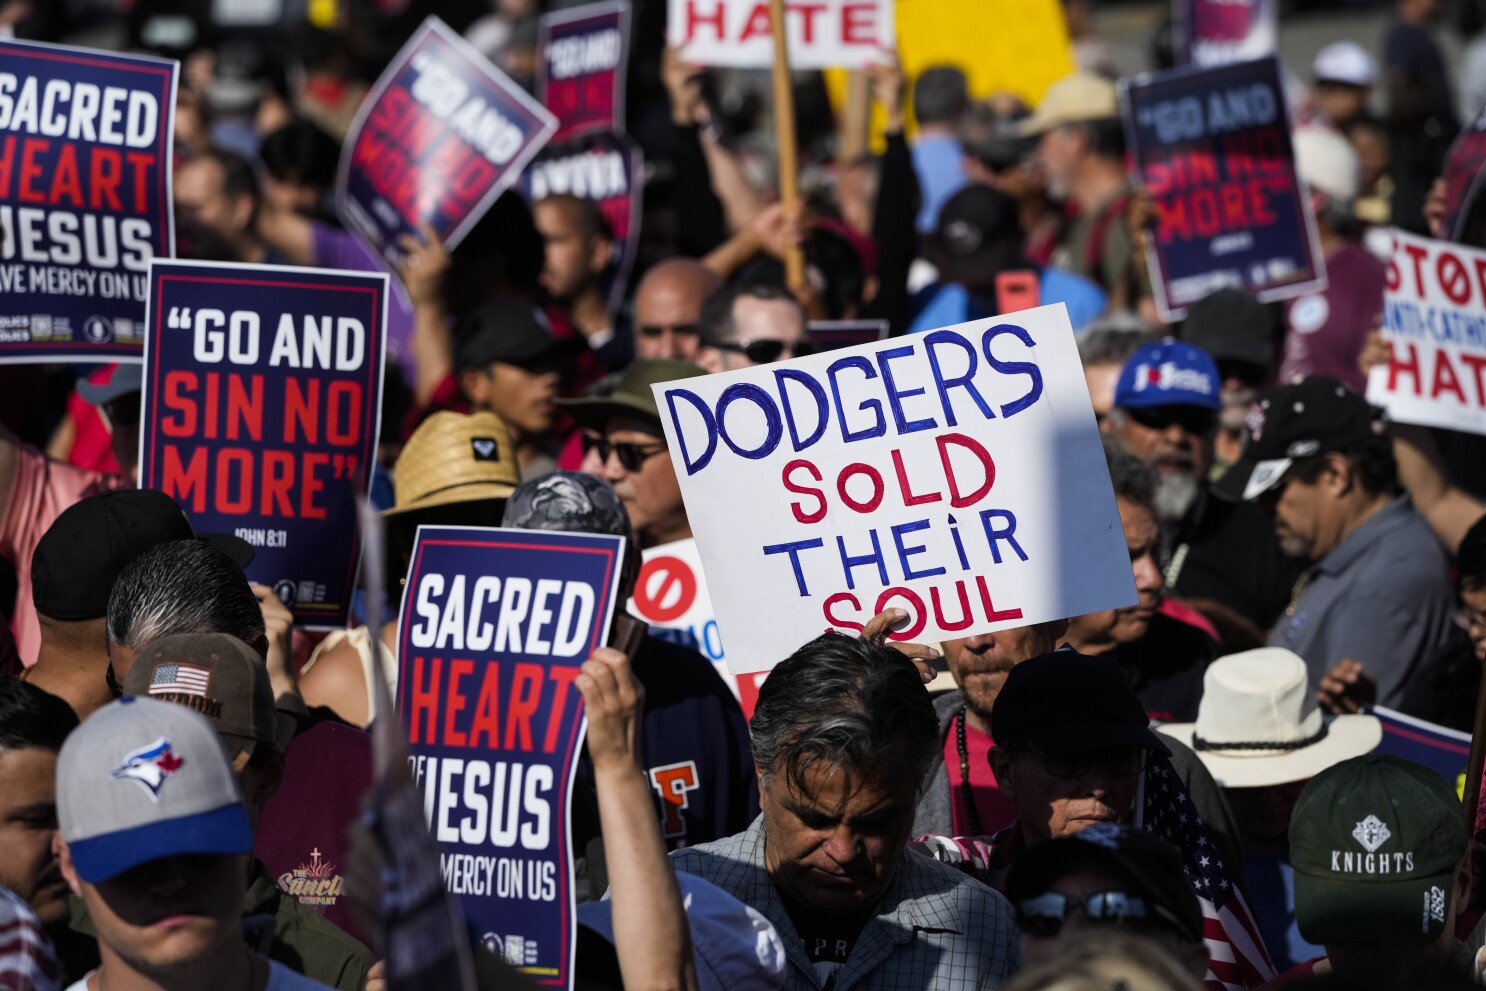 A nun commends Dodgers' handling of Pride Night controversy. Some  archbishops call it blasphemy